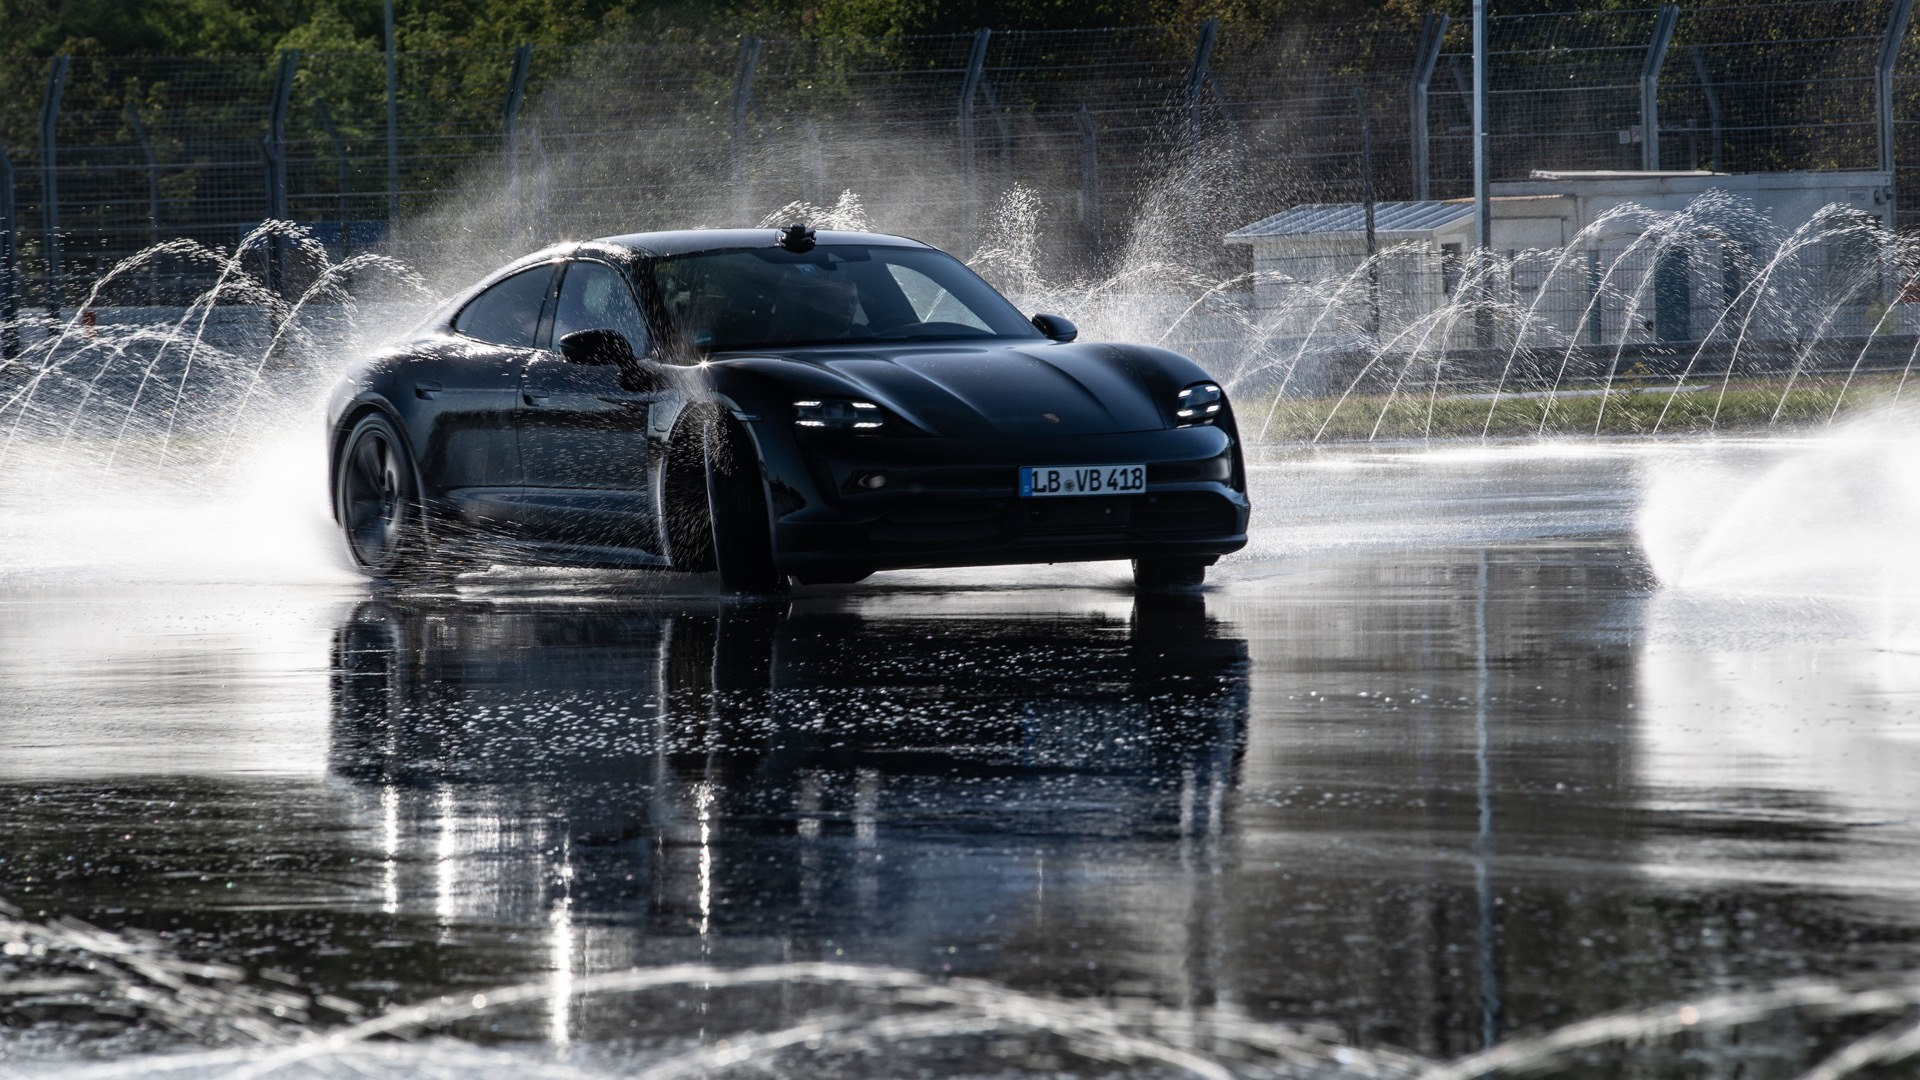 Porsche Taycan sets Guinness World Record for longest drift with an electric vehicle